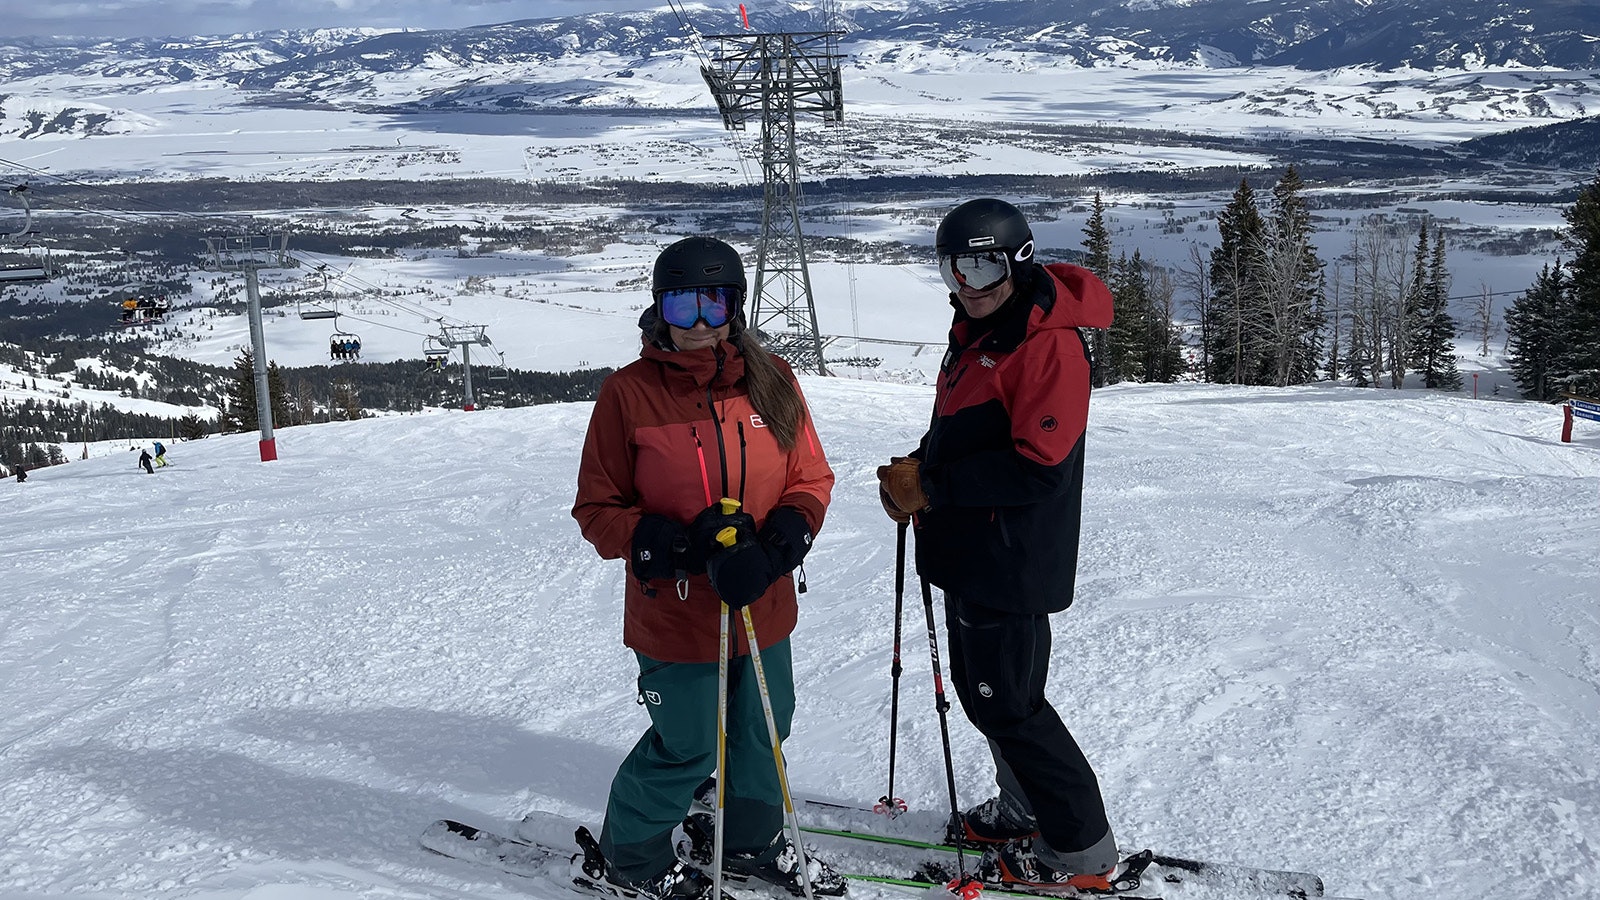 Matt McCreedy not only has a passion for the ski industry as CFO for Jackson Hole Mountain Resort for 32 years, he and wife Kari also love to ski.